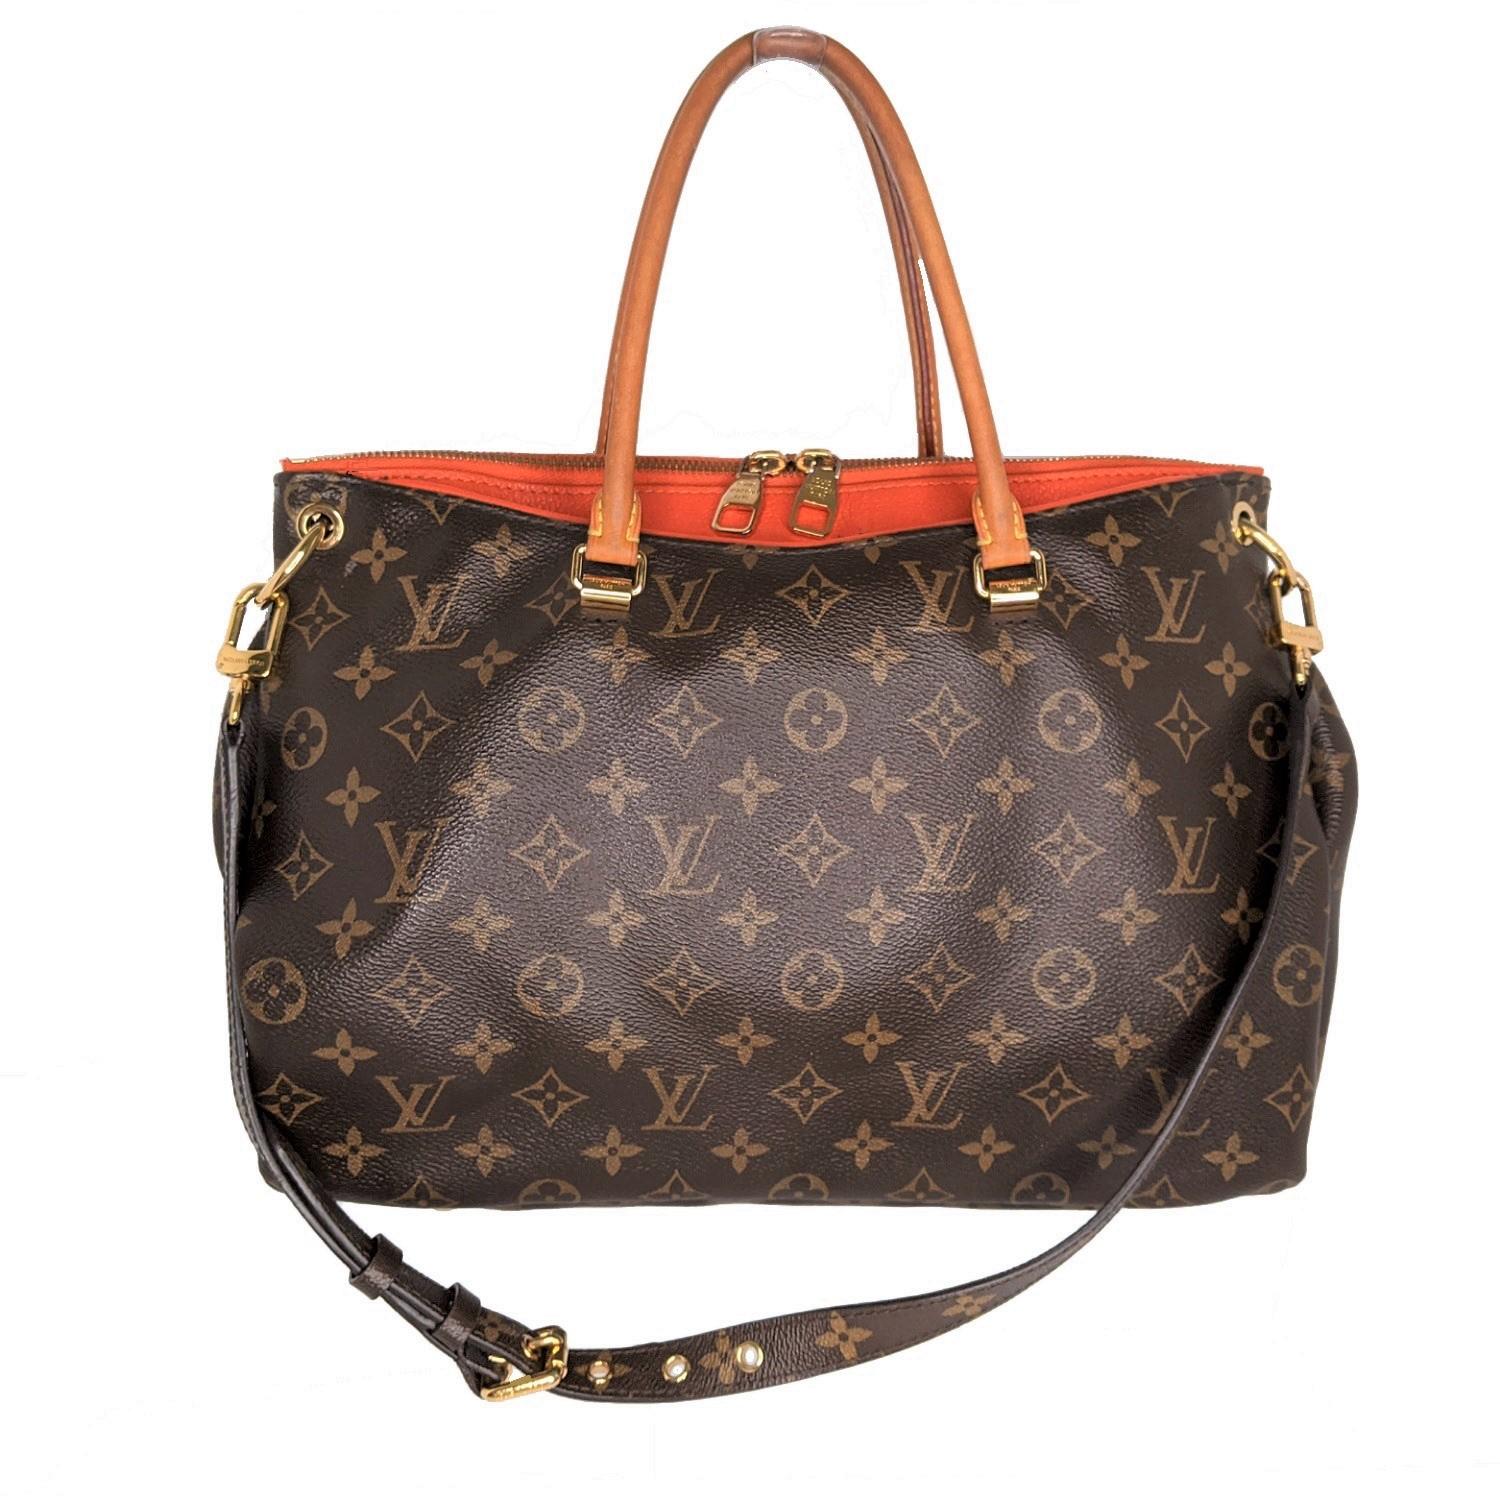 Brown and tan monogram coated canvas Louis Vuitton Pallas tote with brass hardware, single flat shoulder strap featuring buckle adjustment, dual rolled top handles, tan Vachetta and tangerine leather trim, protective feet at base, dual exterior